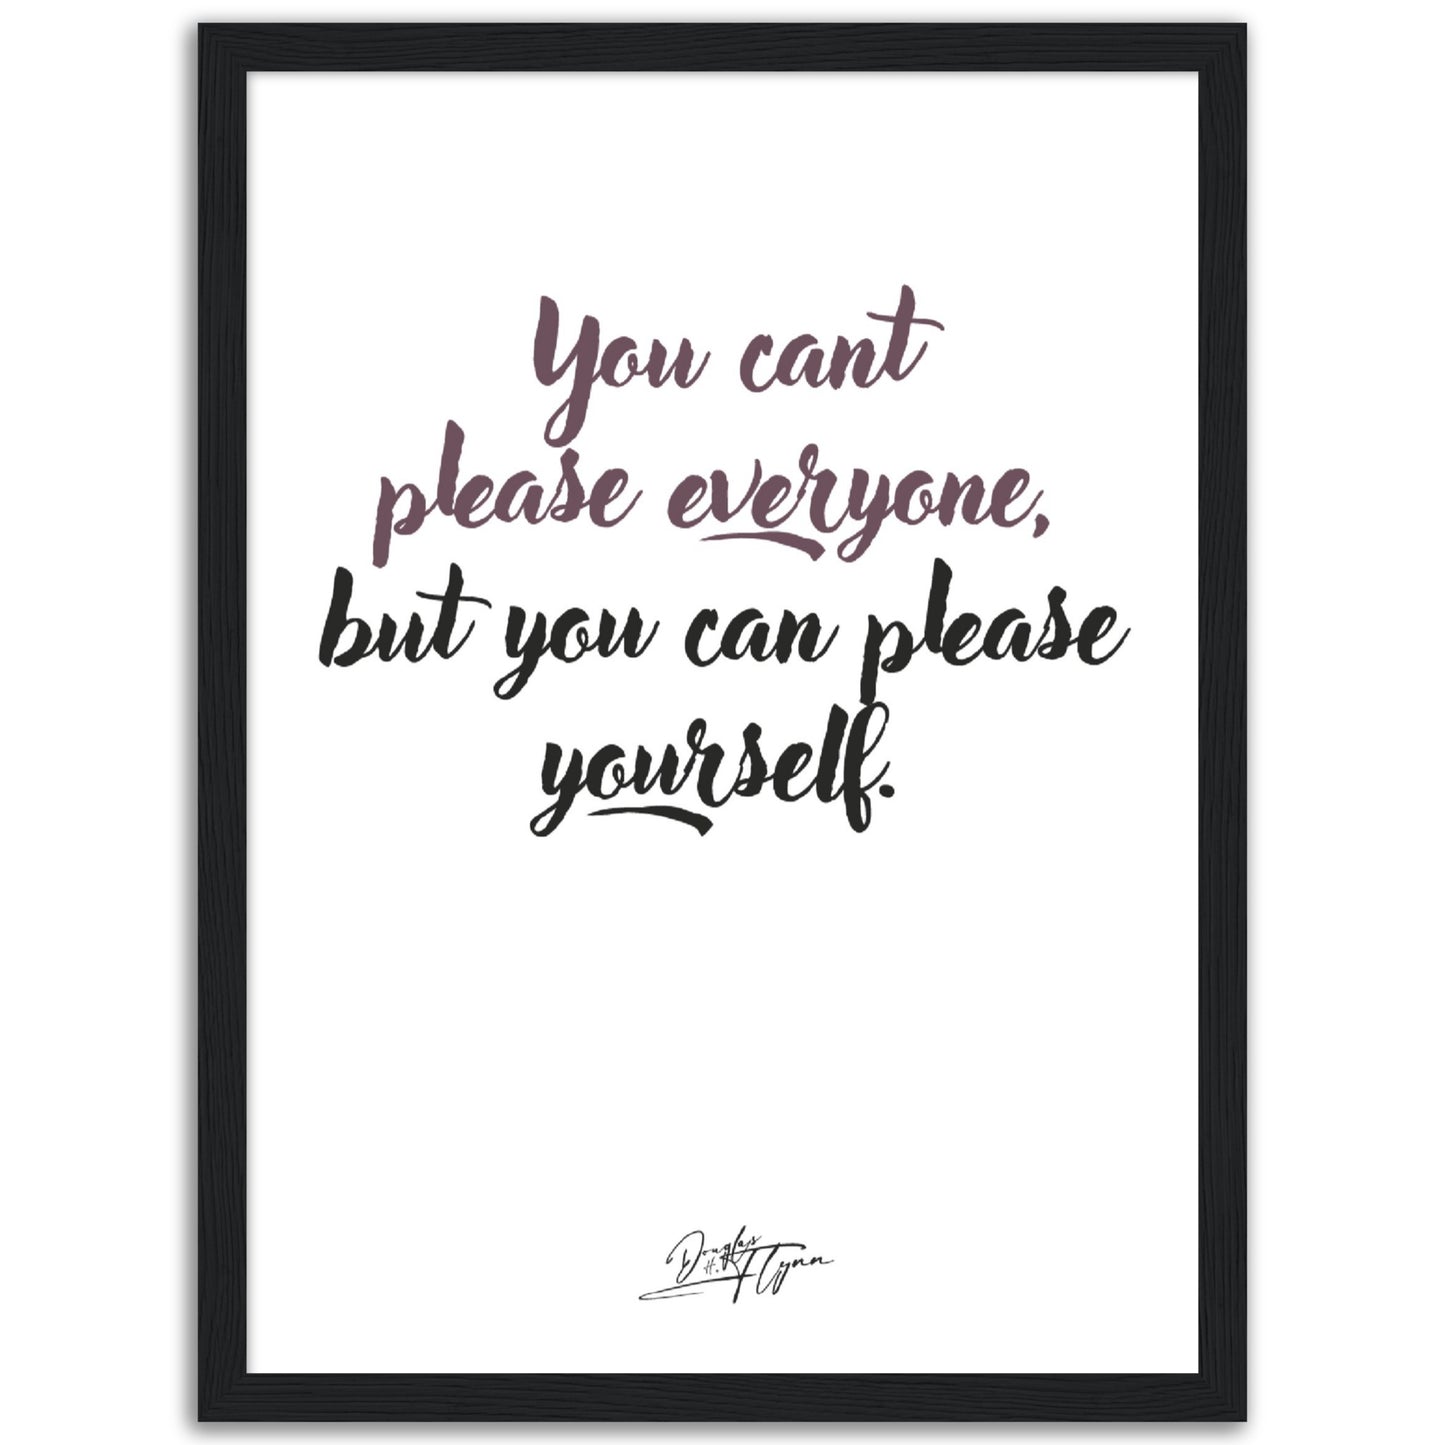 »You can't please everyone«